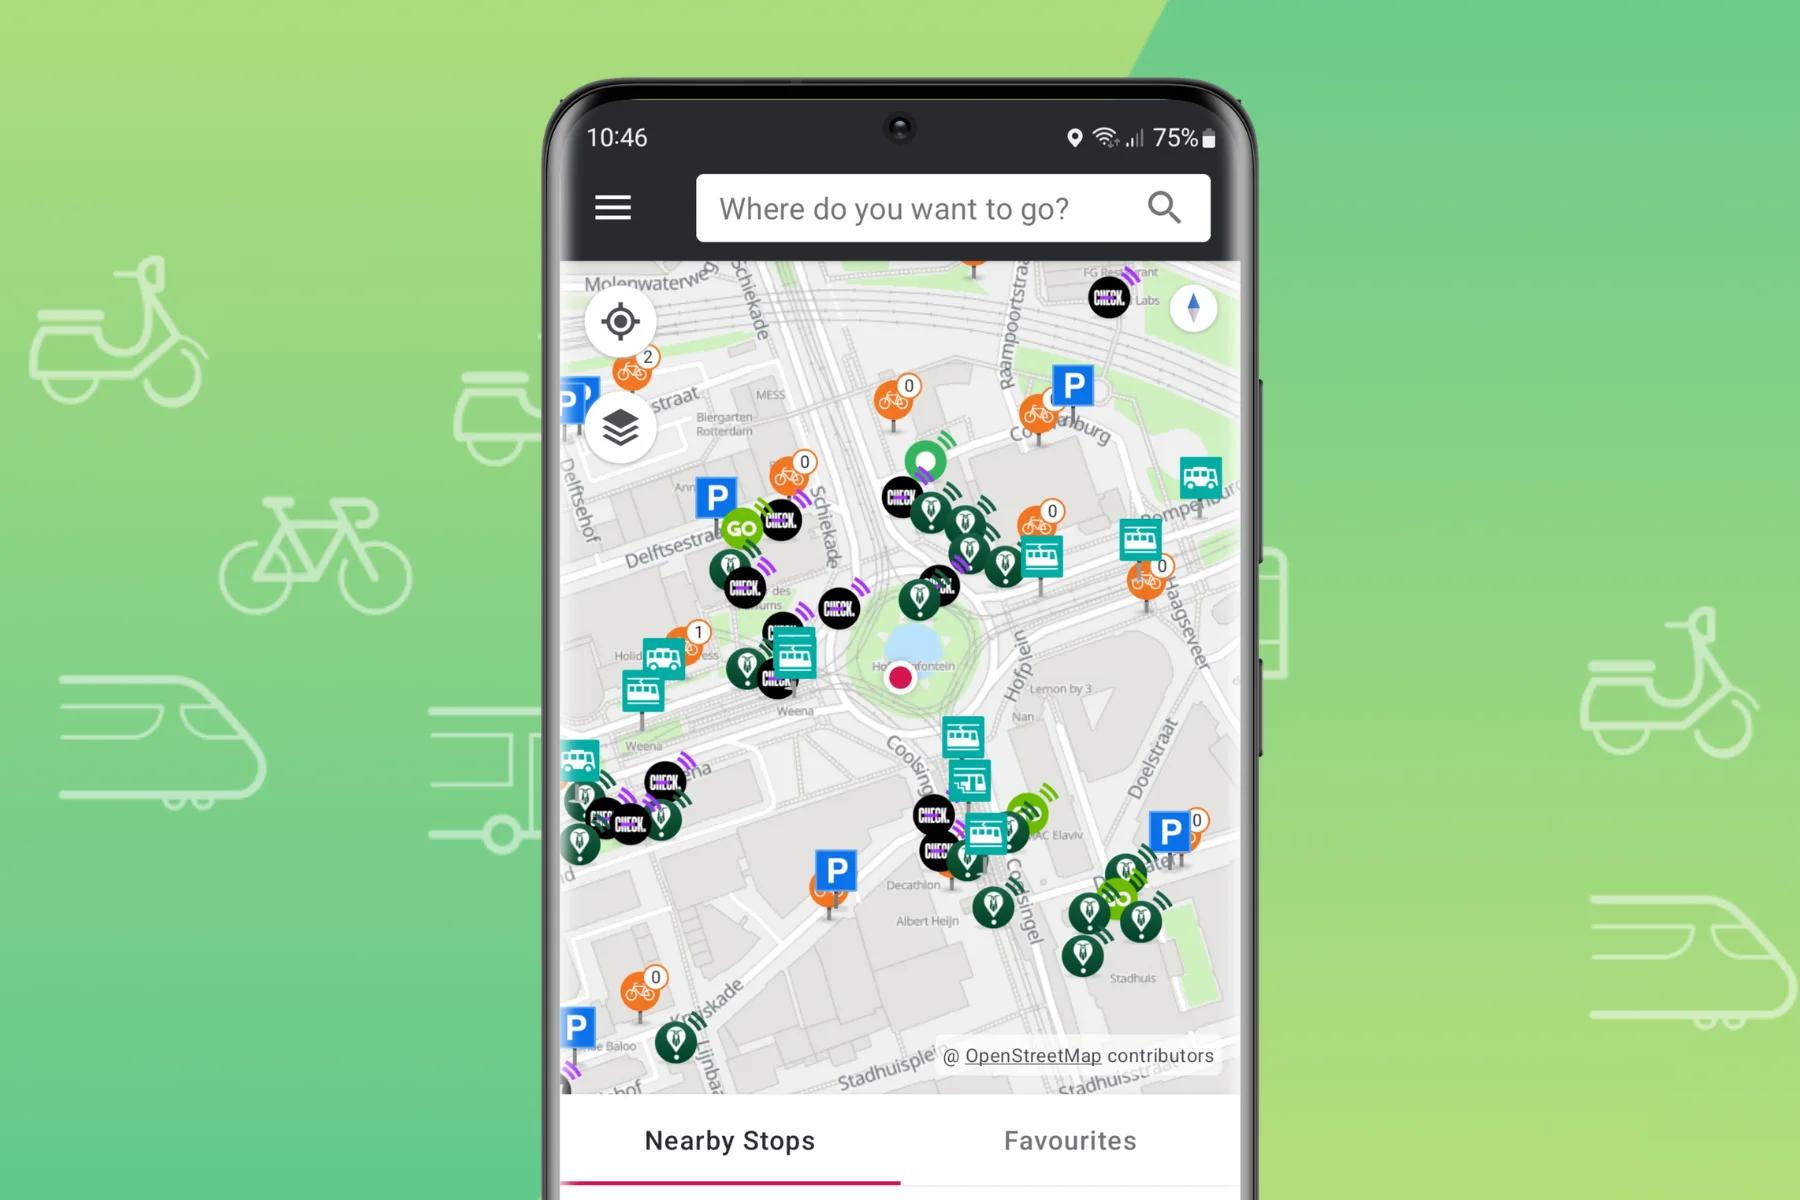 Want to continue travelling and find shared transport near you? Tap 'nearby stops' in the app and discover all the stops, shared transport and stations around you. Continue your trip with a shared bike, scooter or car.